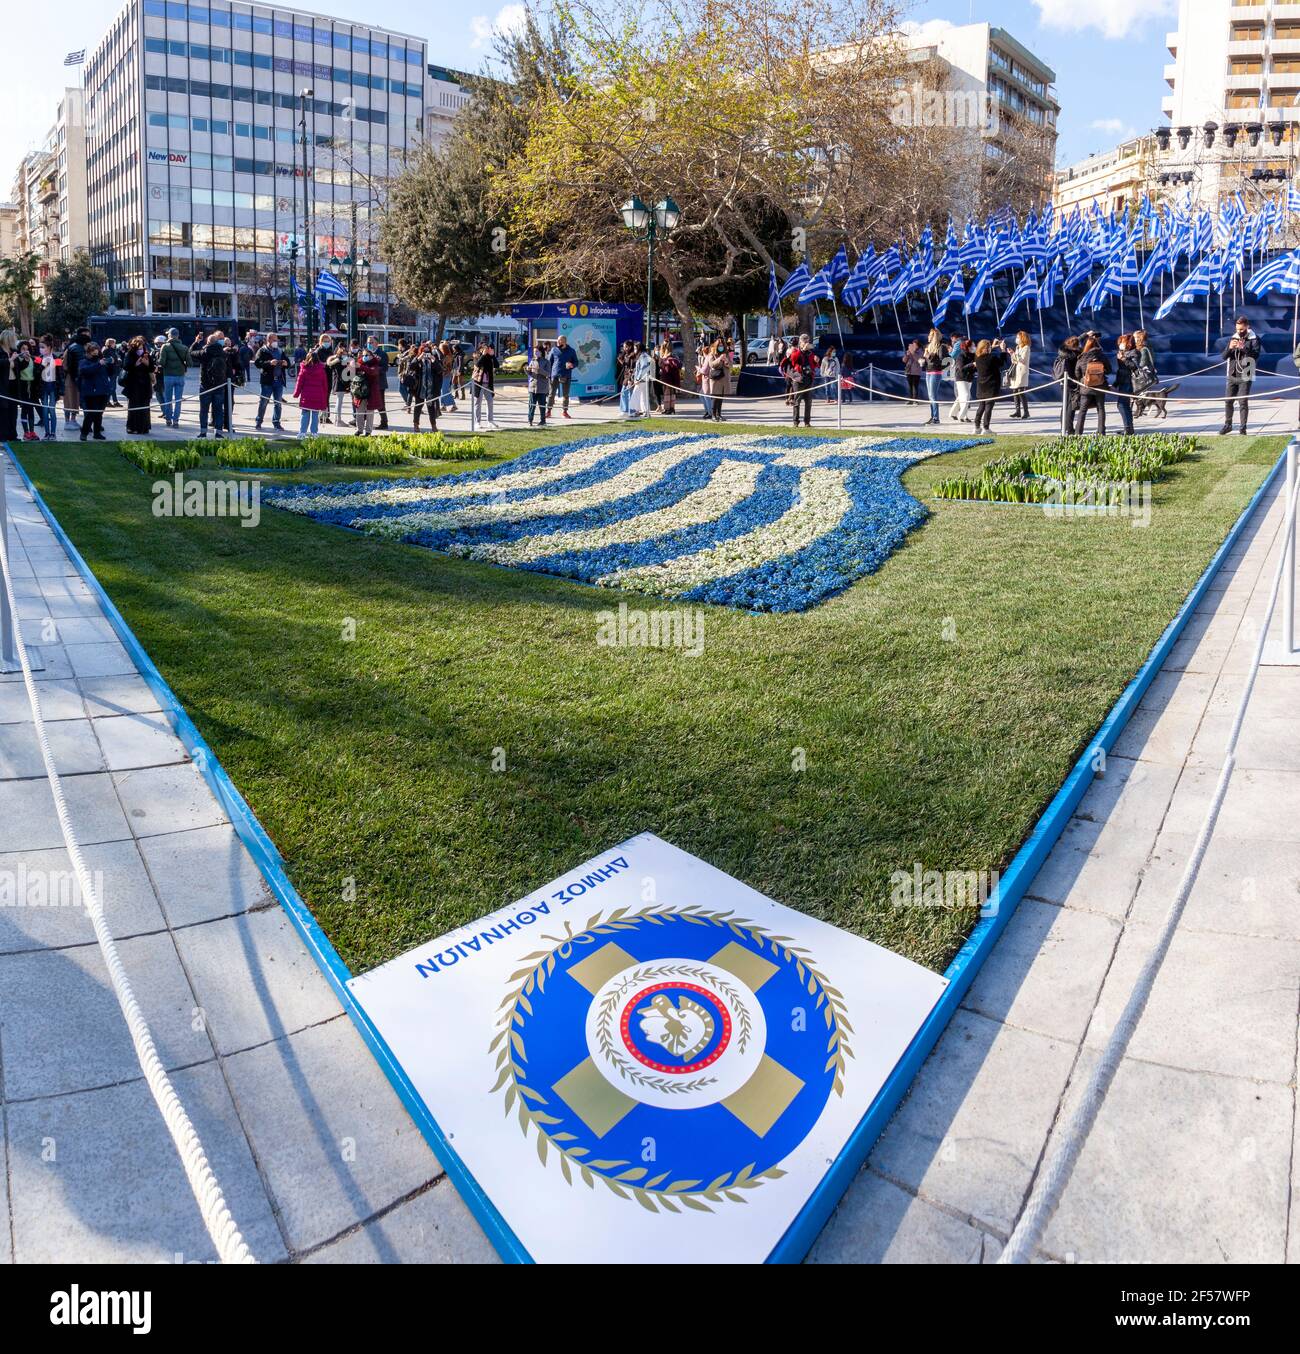 A Greek flag made of blue and white flowers at Syntagma Square, Athens, during the celebrations for the 200 years since the Greek Indepencence War. Stock Photo